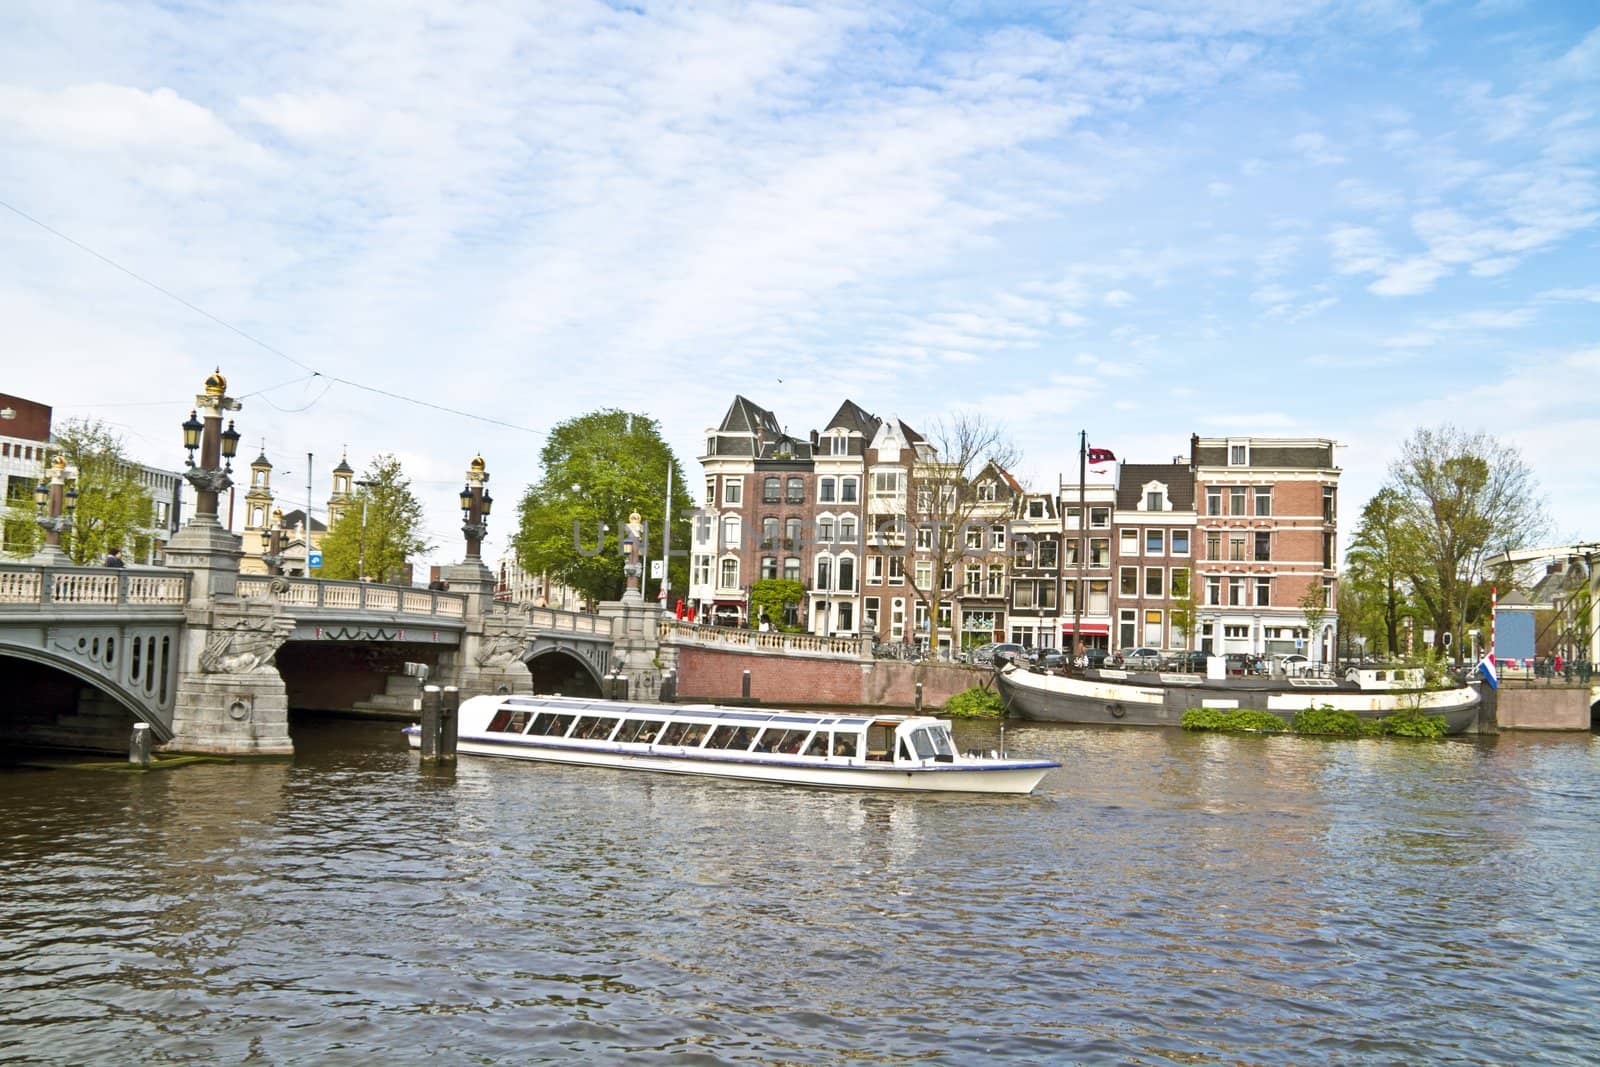 Sightseeing in Amsterdam the Netherlands on the river Amsteld by devy